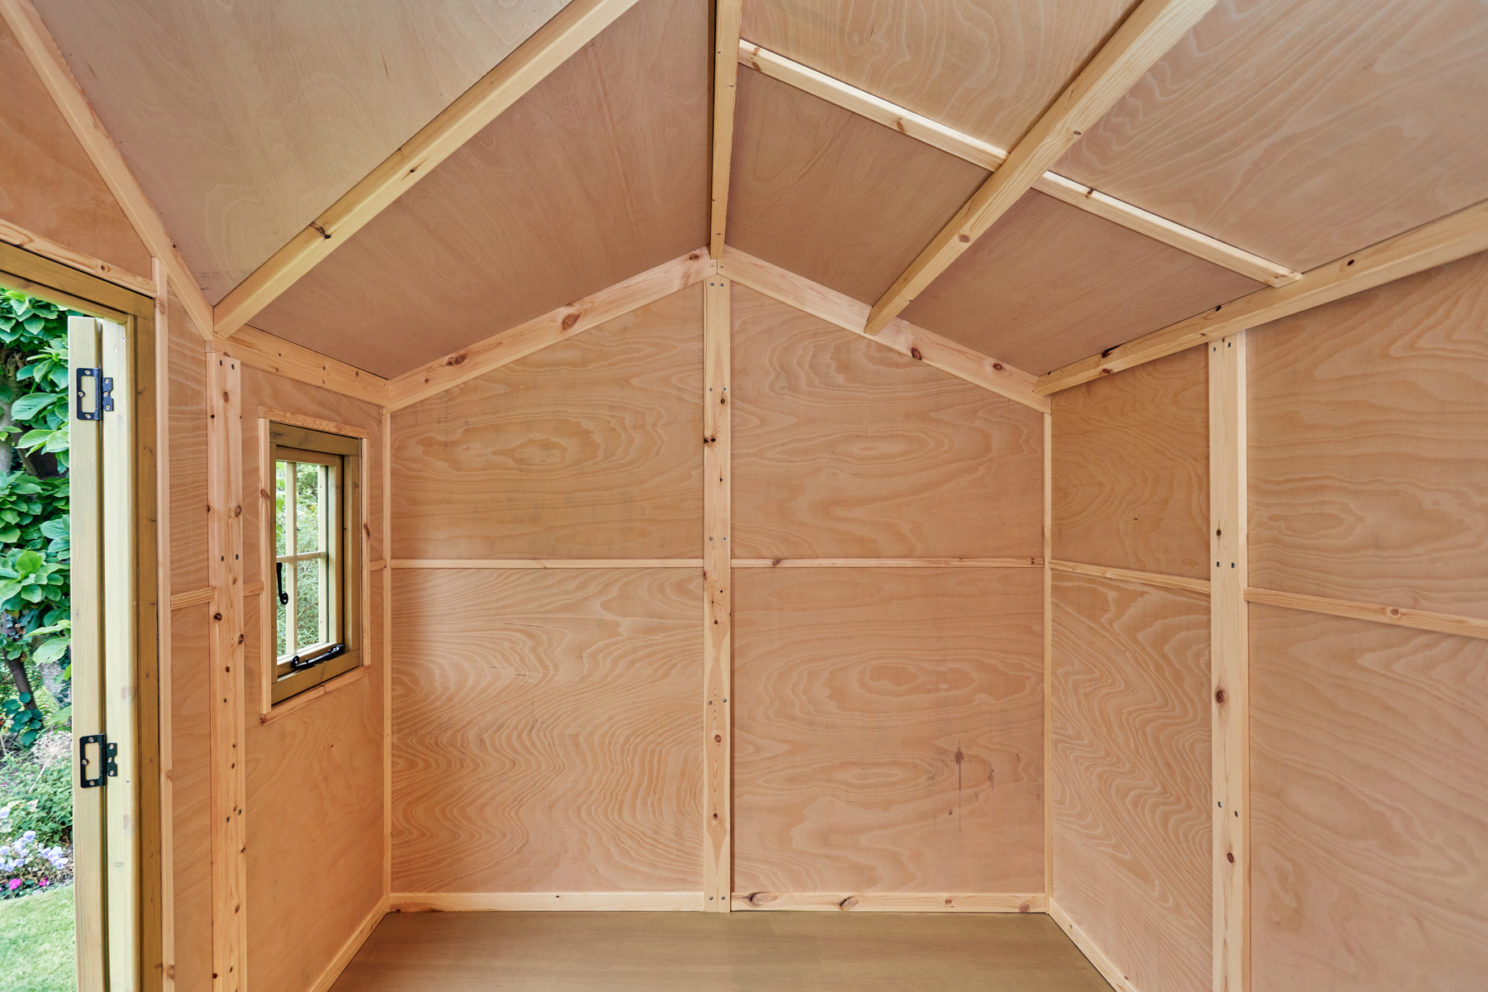 Fully insulated walls of the Comfortably Posh Shed